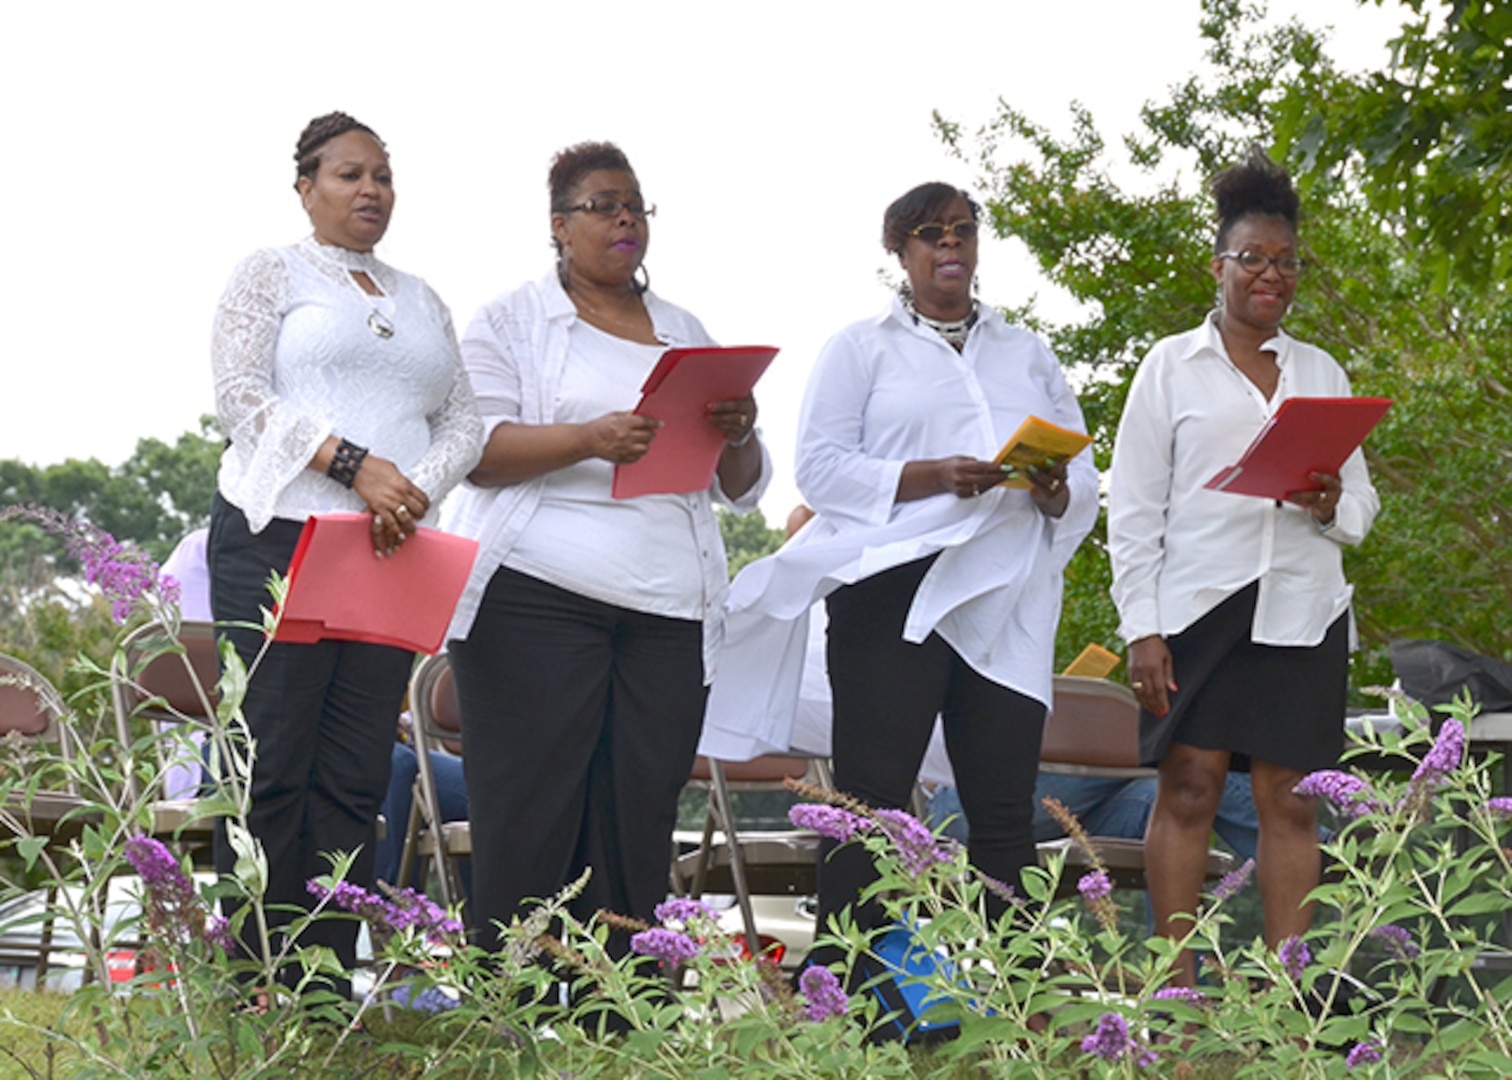 Defense Logistics Agency Aviation's Bellwood Choir members sang for attendees during the Juneteenth Observance ceremony on June 23, 2017 at the African-American gravesite on Defense Supply Center Richmond, Virginia. Choir members from left to right are: Phyllis Spearman, lead business readiness and compliance specialist, Business Process Support Directorate; Patricia Dandridge, contract specialist, Supplier Operations Commodities Directorate; Cynthia White, resolution specialist, and Margie Brooks, lead general supply specialist in Planning Process Directorate. 